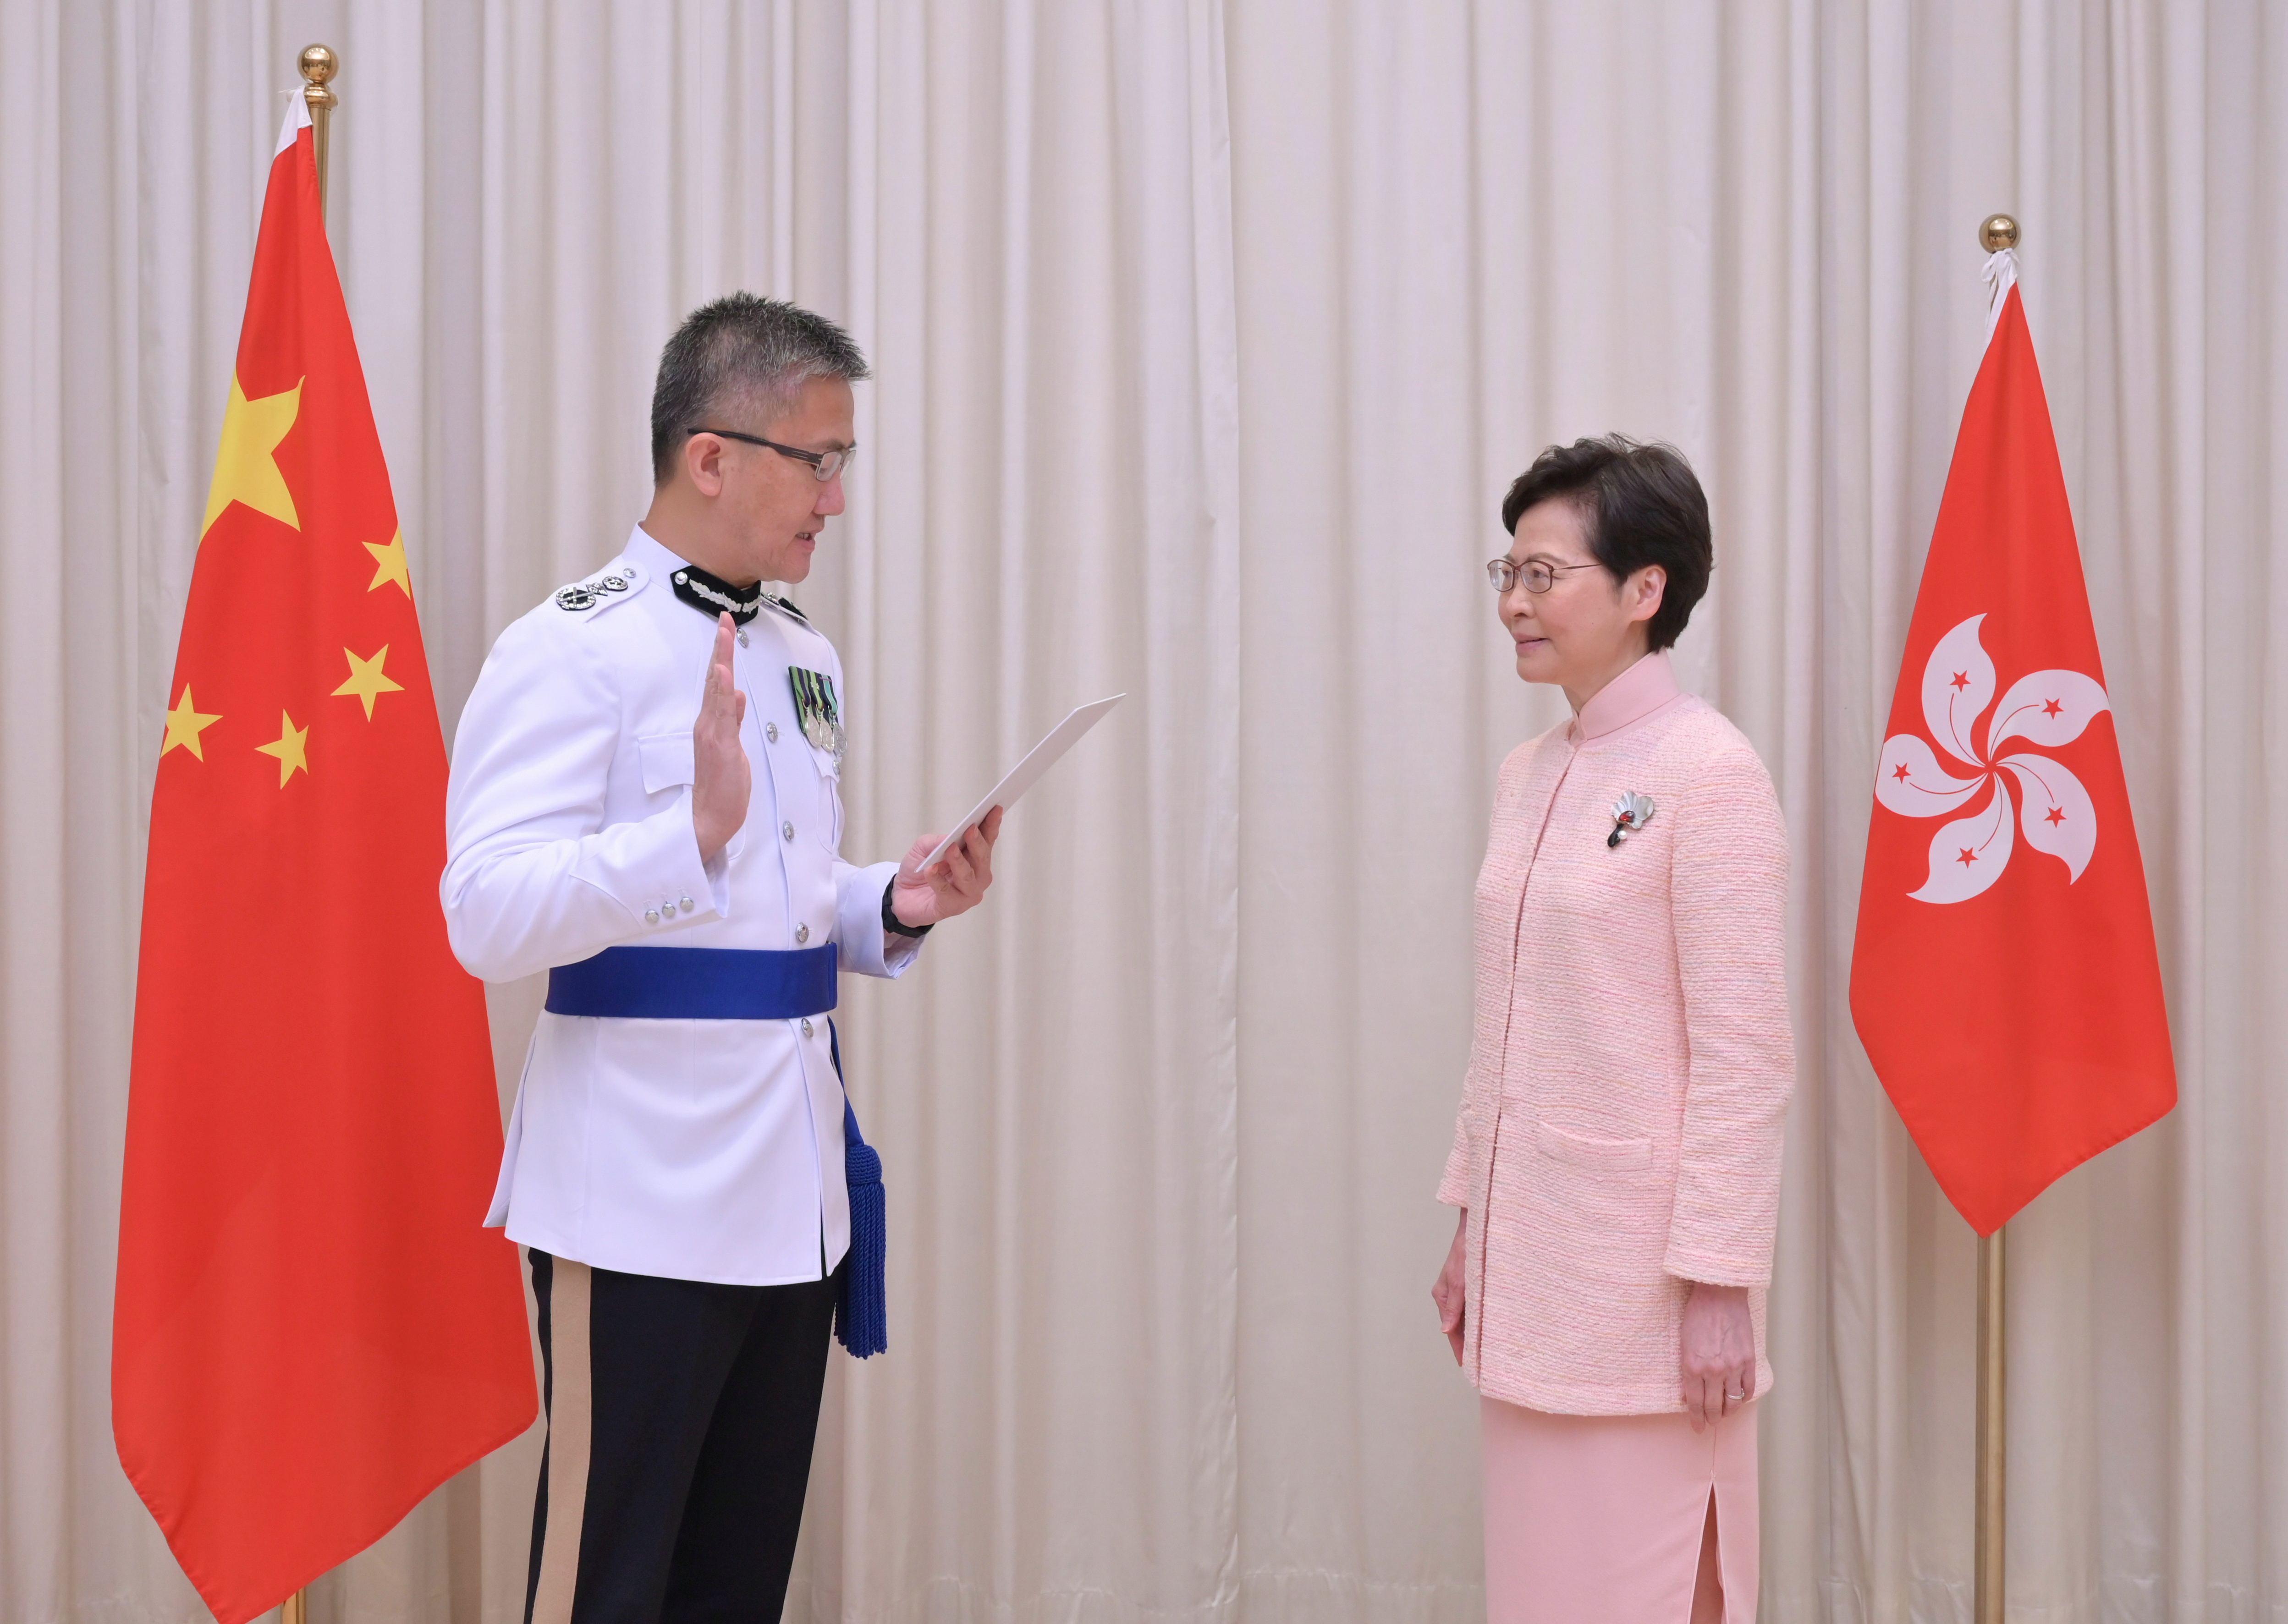 New Commissioner of Police Siu takes oath of office in Hong Kong